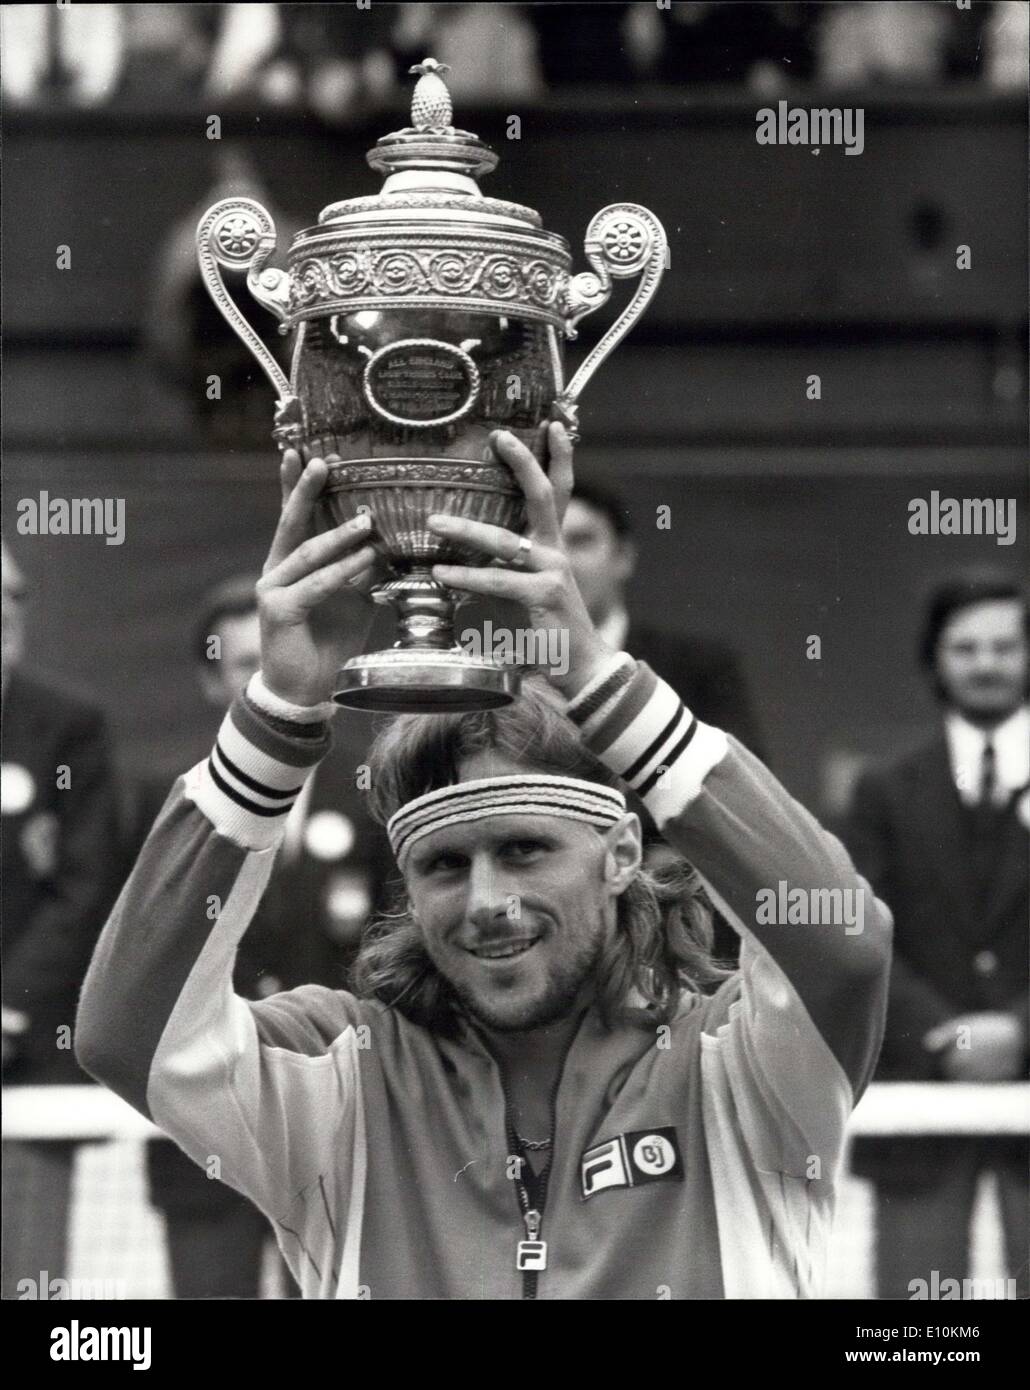 Jul. 08, 1973 - Bjorn Borg Wins The Wimbledon Title For The Third Time Running To Equal Fred Perry's Record: Today on the centre court at Wimbledon Bjorn Borg won the men's singles title by beating Jimmy Conlor 6-2 6-2 6-3. This makes it three on a row for Borg making him only the second player in the history of the game to do this, the other is the famous Fred Perry. Photo shows Bjorn Borg holds up the trophy on the centre court at Wimbledon this afternoon after beating Jimmy Connors 6-2 6-2 6-3. Stock Photo